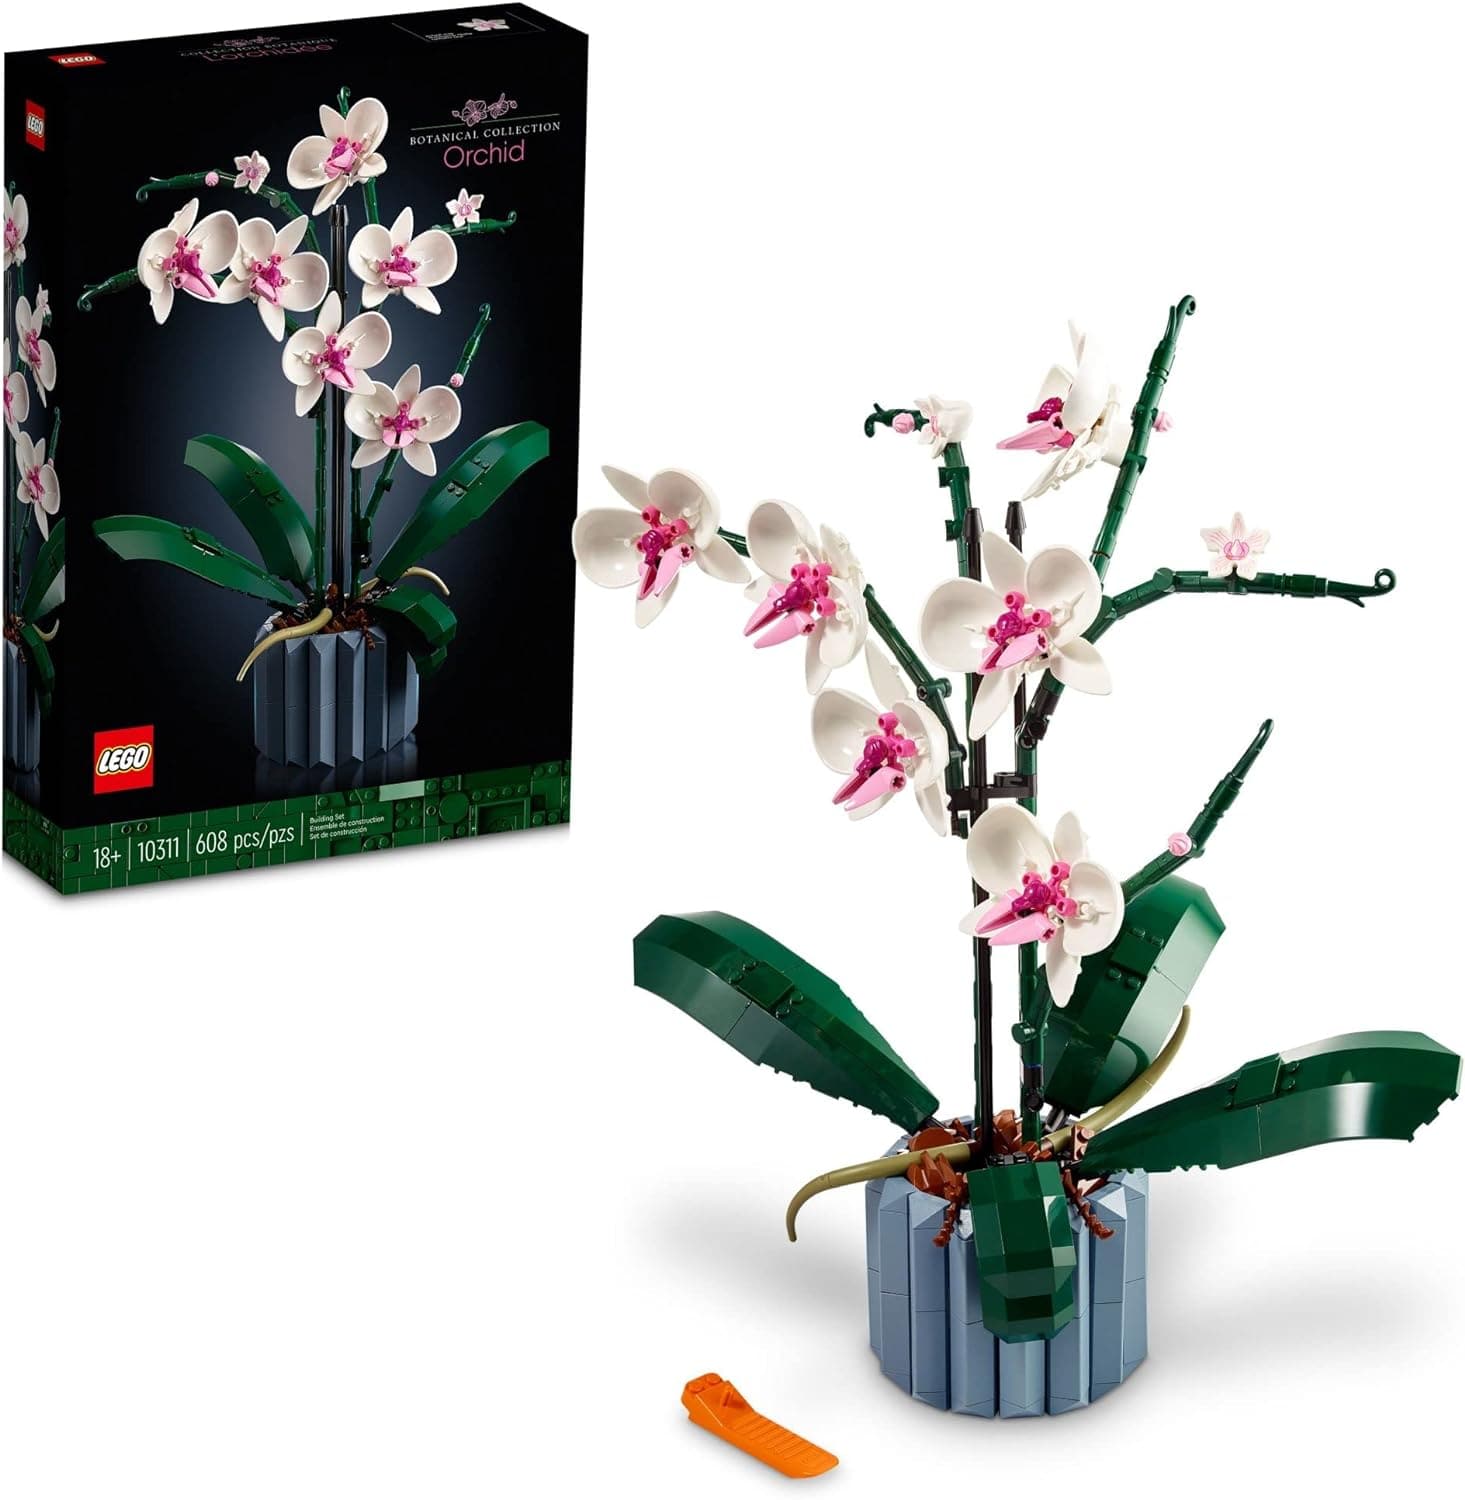 LEGO Icons Orchid Artificial Plant Building Set, Botanical Collection - best price from Maltashopper.com 10311